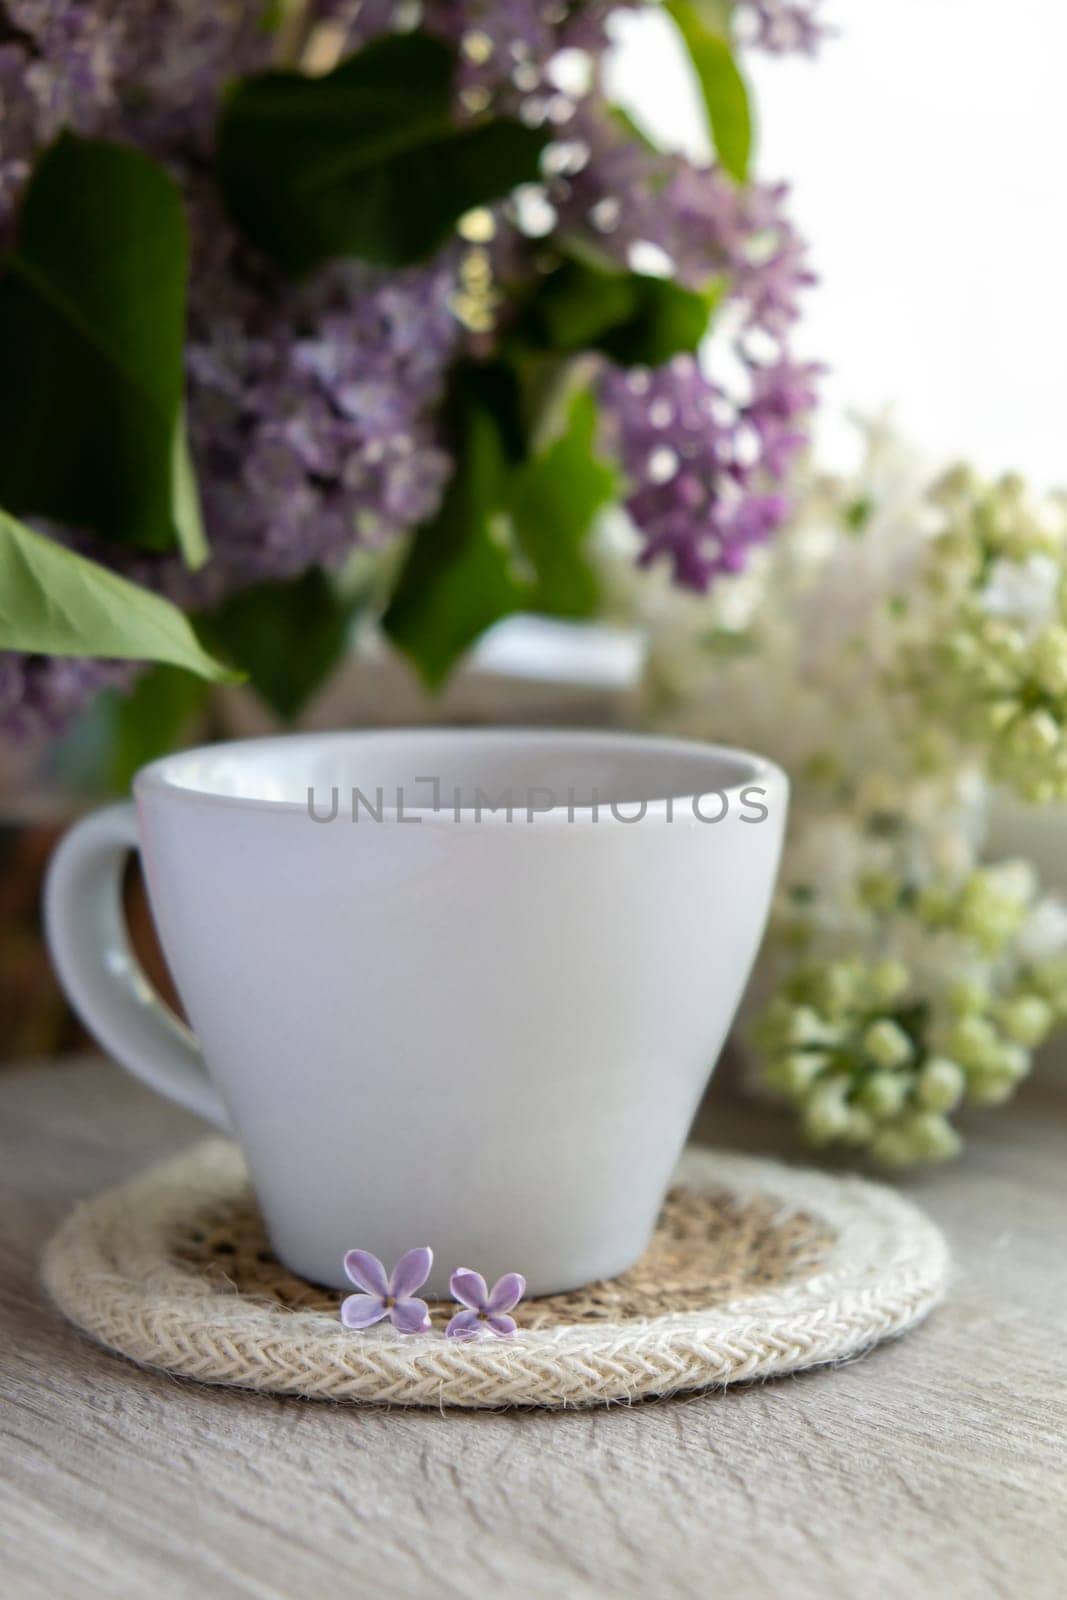 Tasty black tea in white cup on windowsill with aromatic lilac flowers. Spring composition Cup of lilac tea drinking recipe flowering branches of purple lilac. Still life for copy space greeting card, poster, banner, wallpaper. Relaxation and natural ingredients